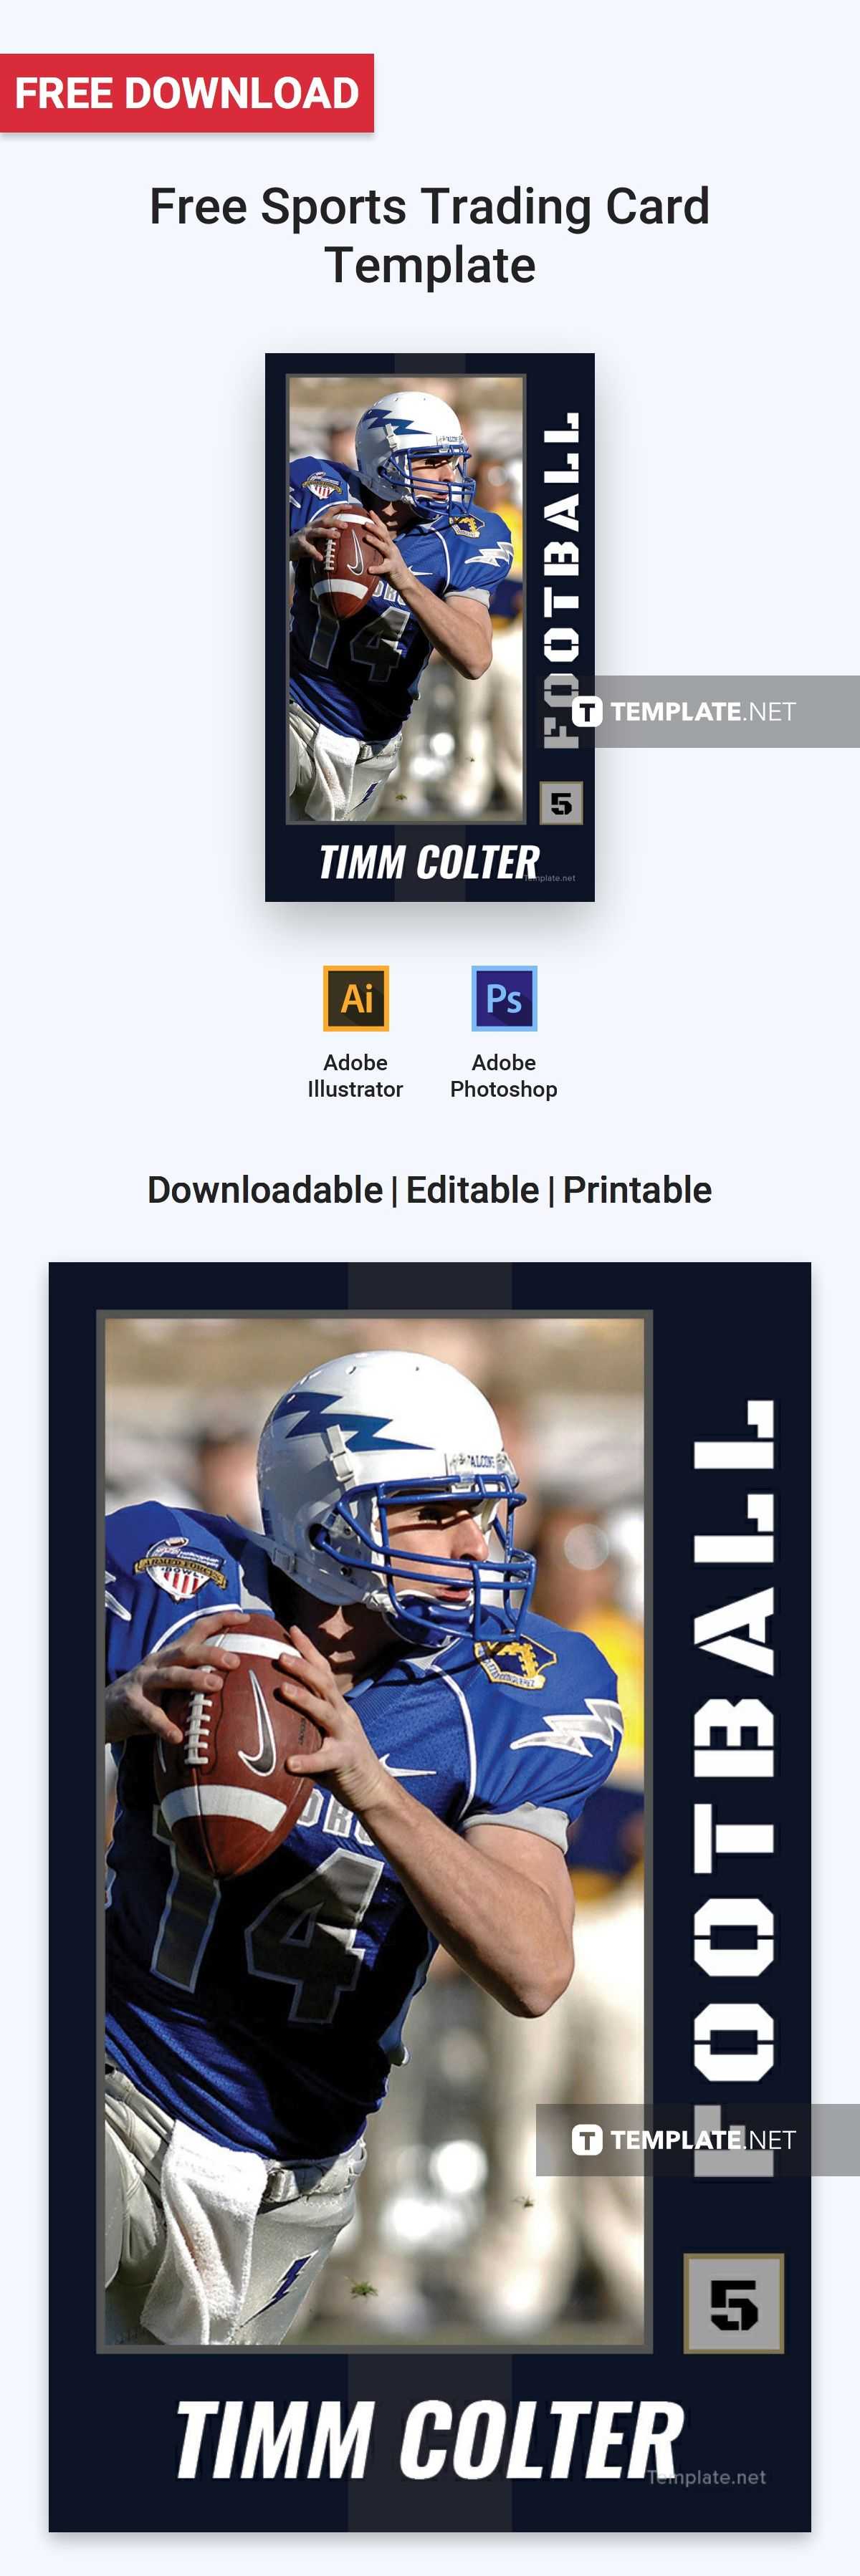 Free Sports Trading Card | Card Templates & Designs 2019 In Within Free Sports Card Template